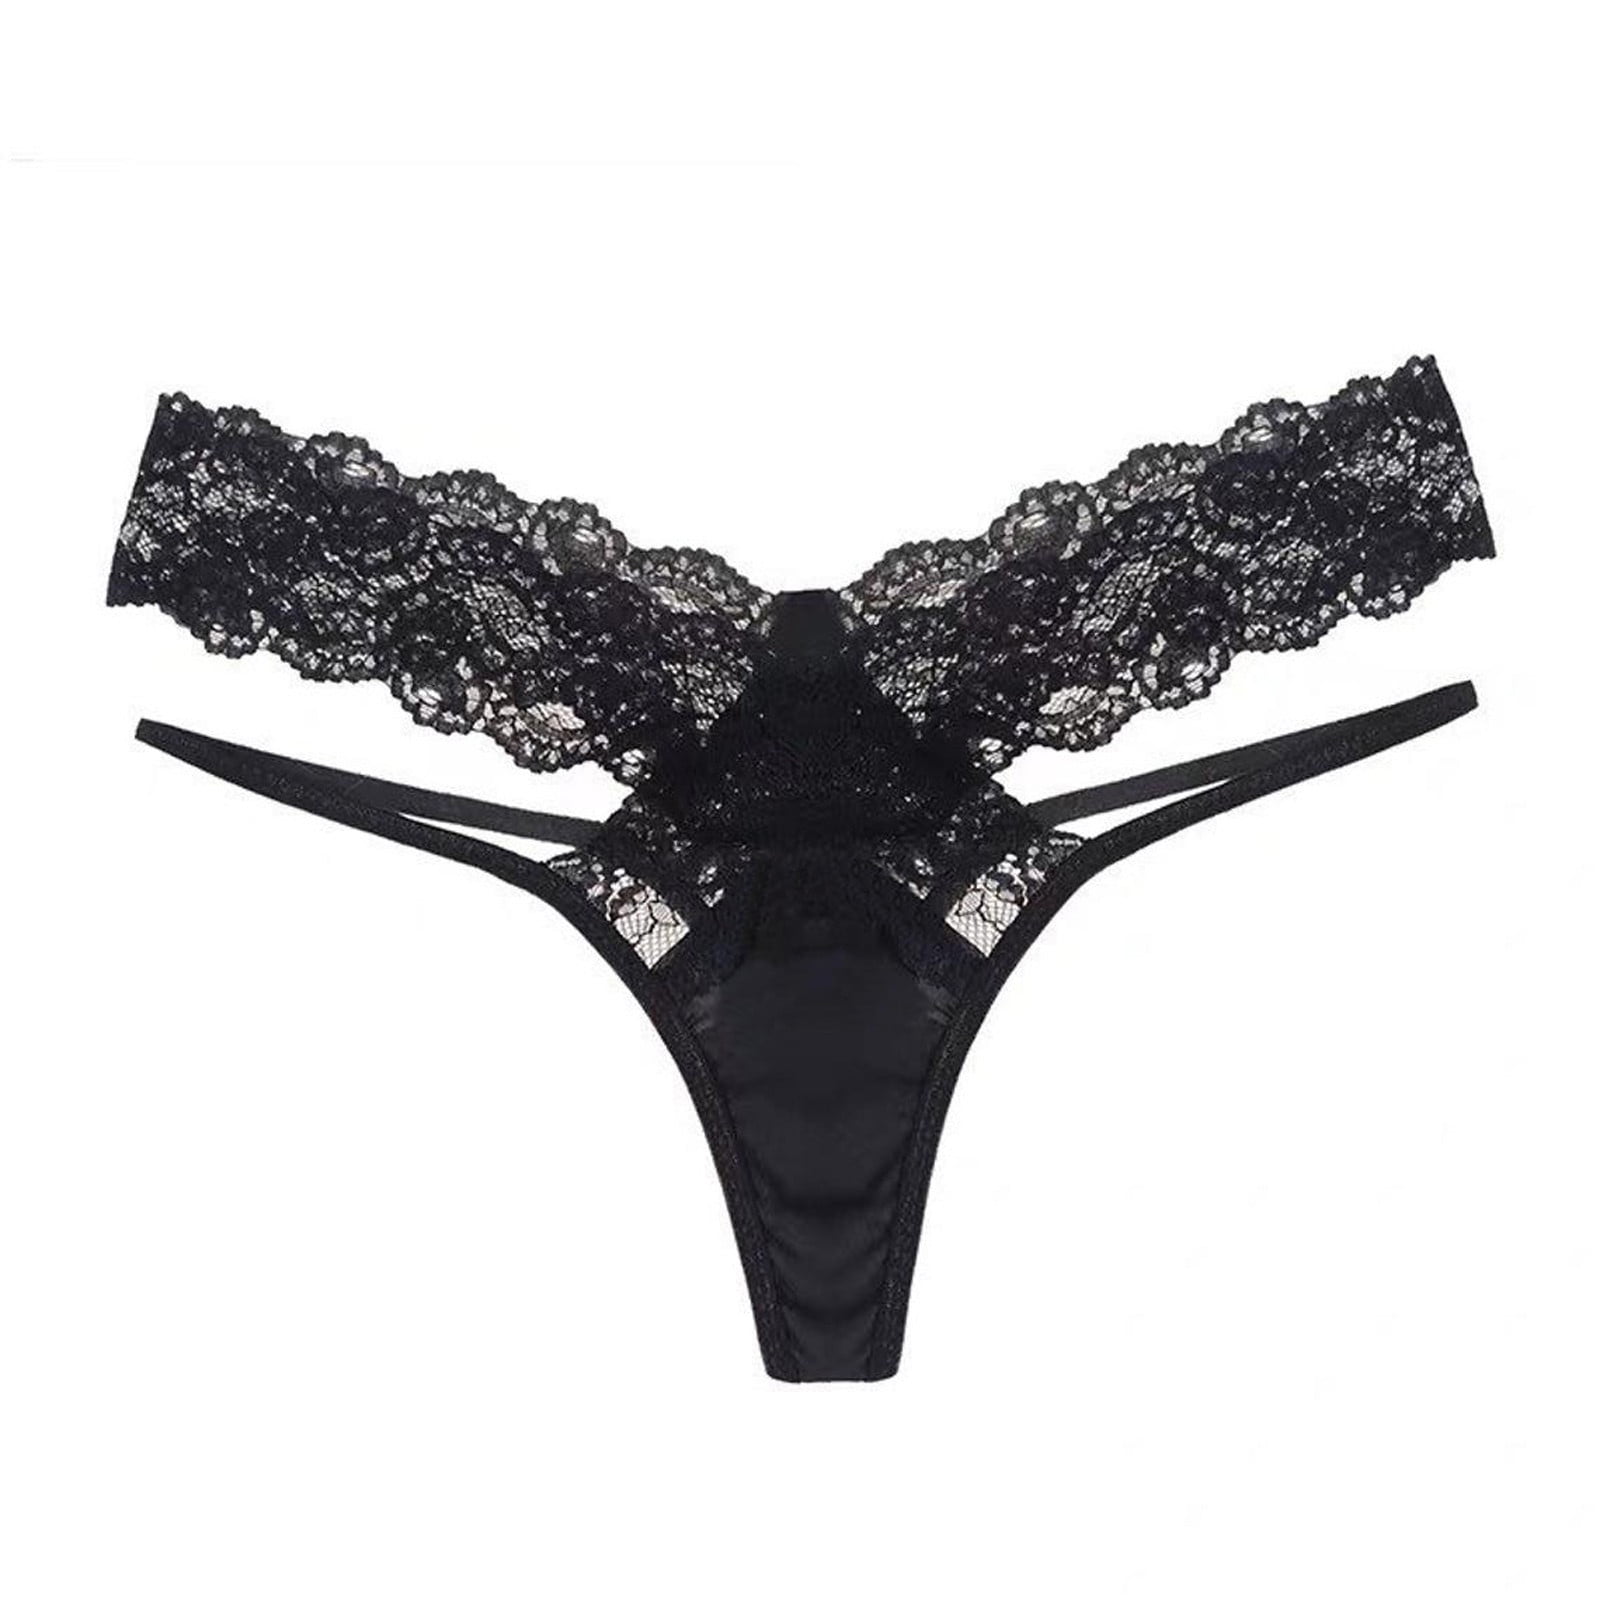 Womens Black Charming Thong Lingerie lace G-String T-Back Panties Strappy Body Harness Panties 